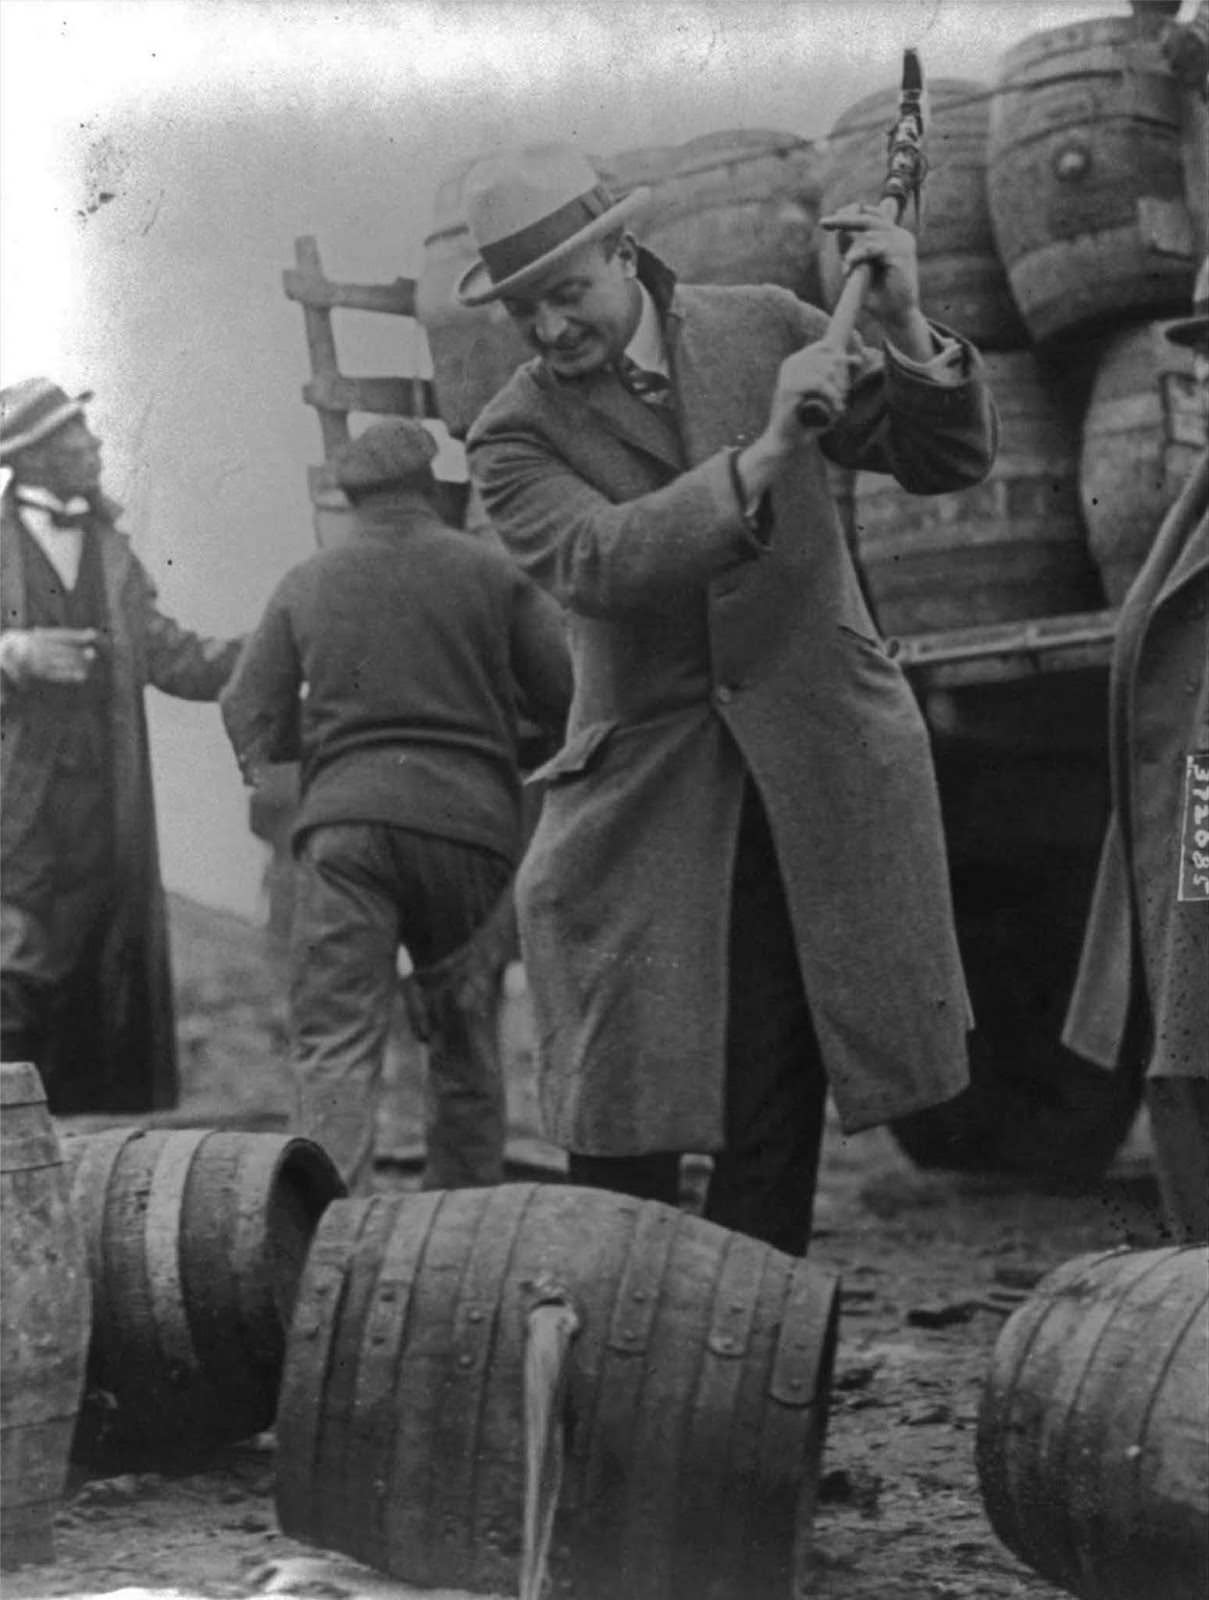 An FBI Officer breaks a confiscated barrel of beer. 1924.